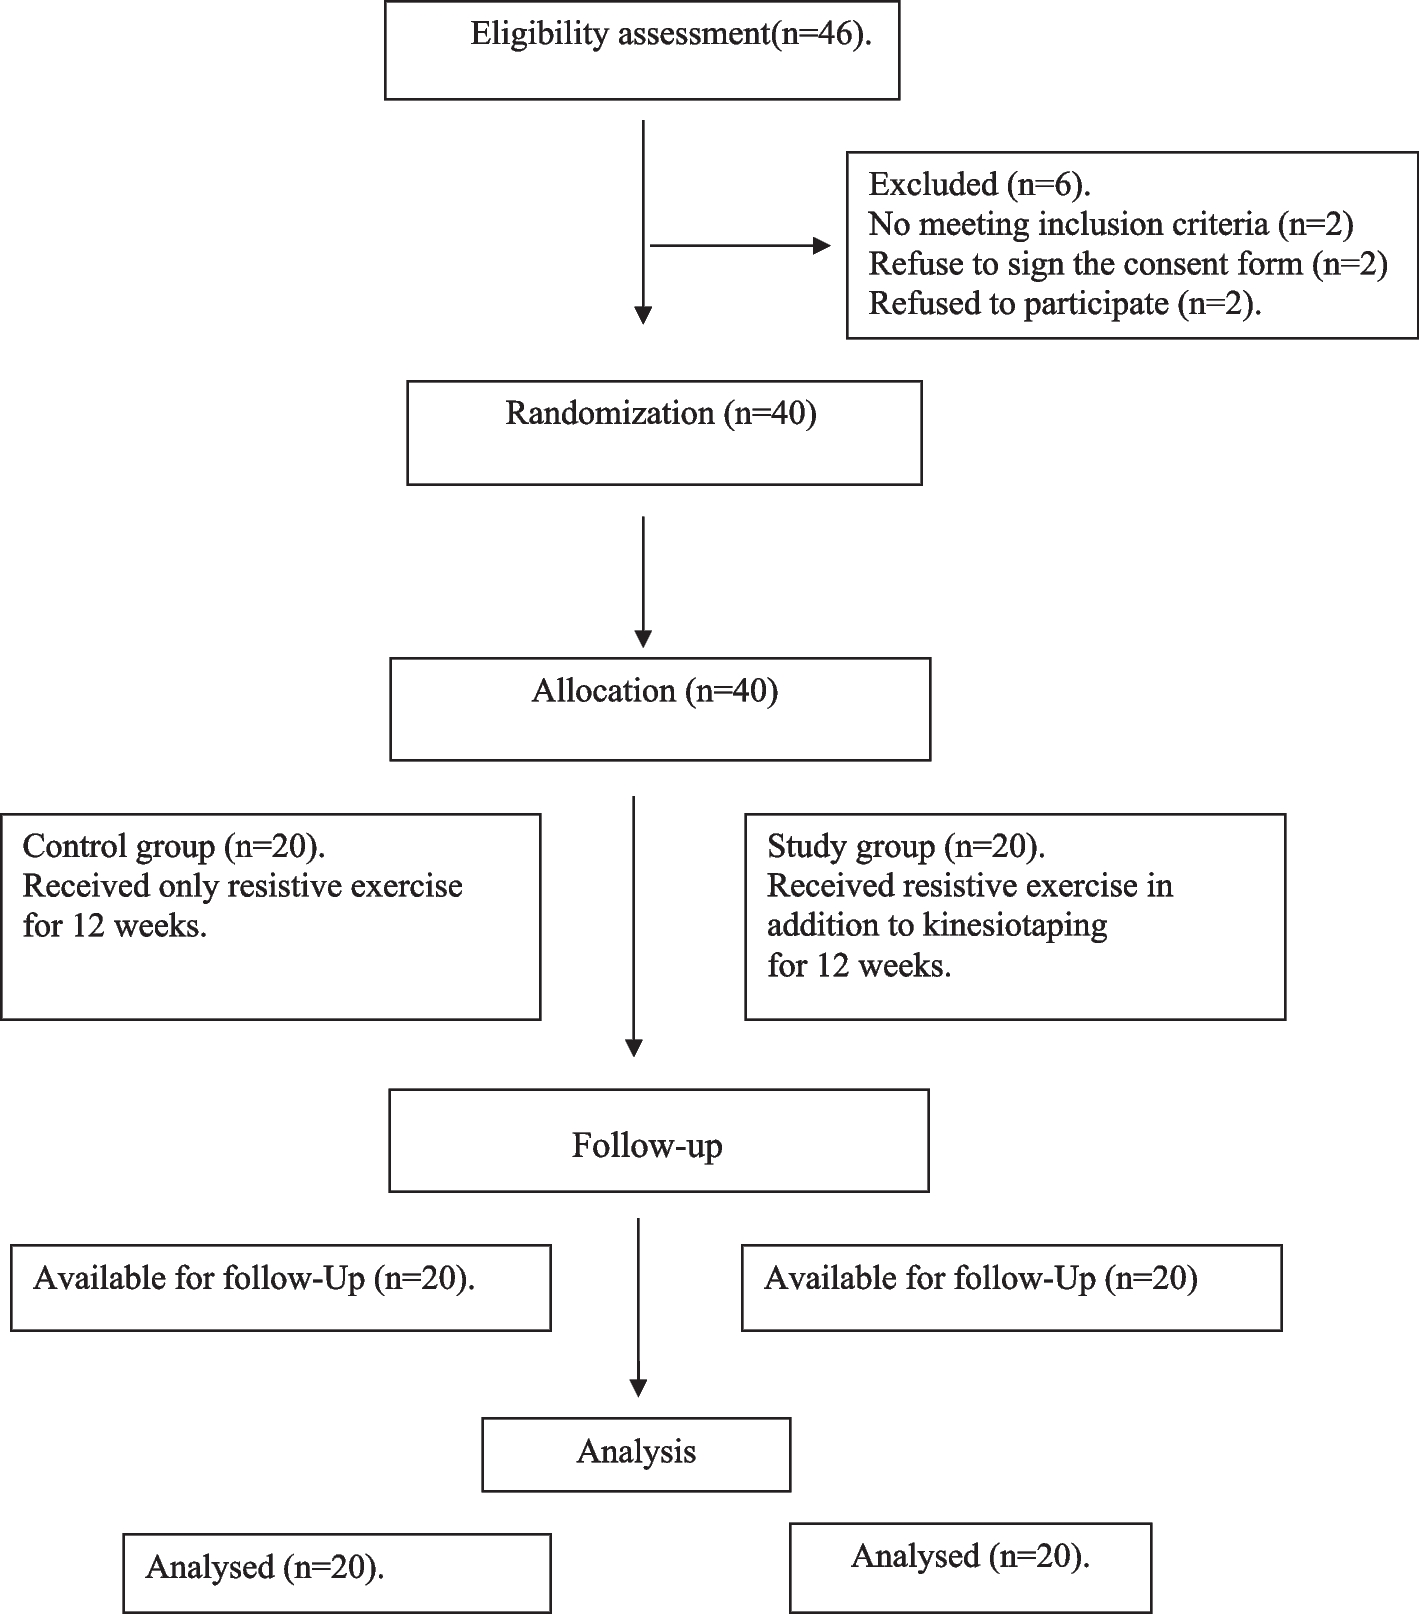 Effect of combined Kinesiotaping and resistive exercise on muscle strength and quality of life in breast cancer survivors: a randomized clinical trial